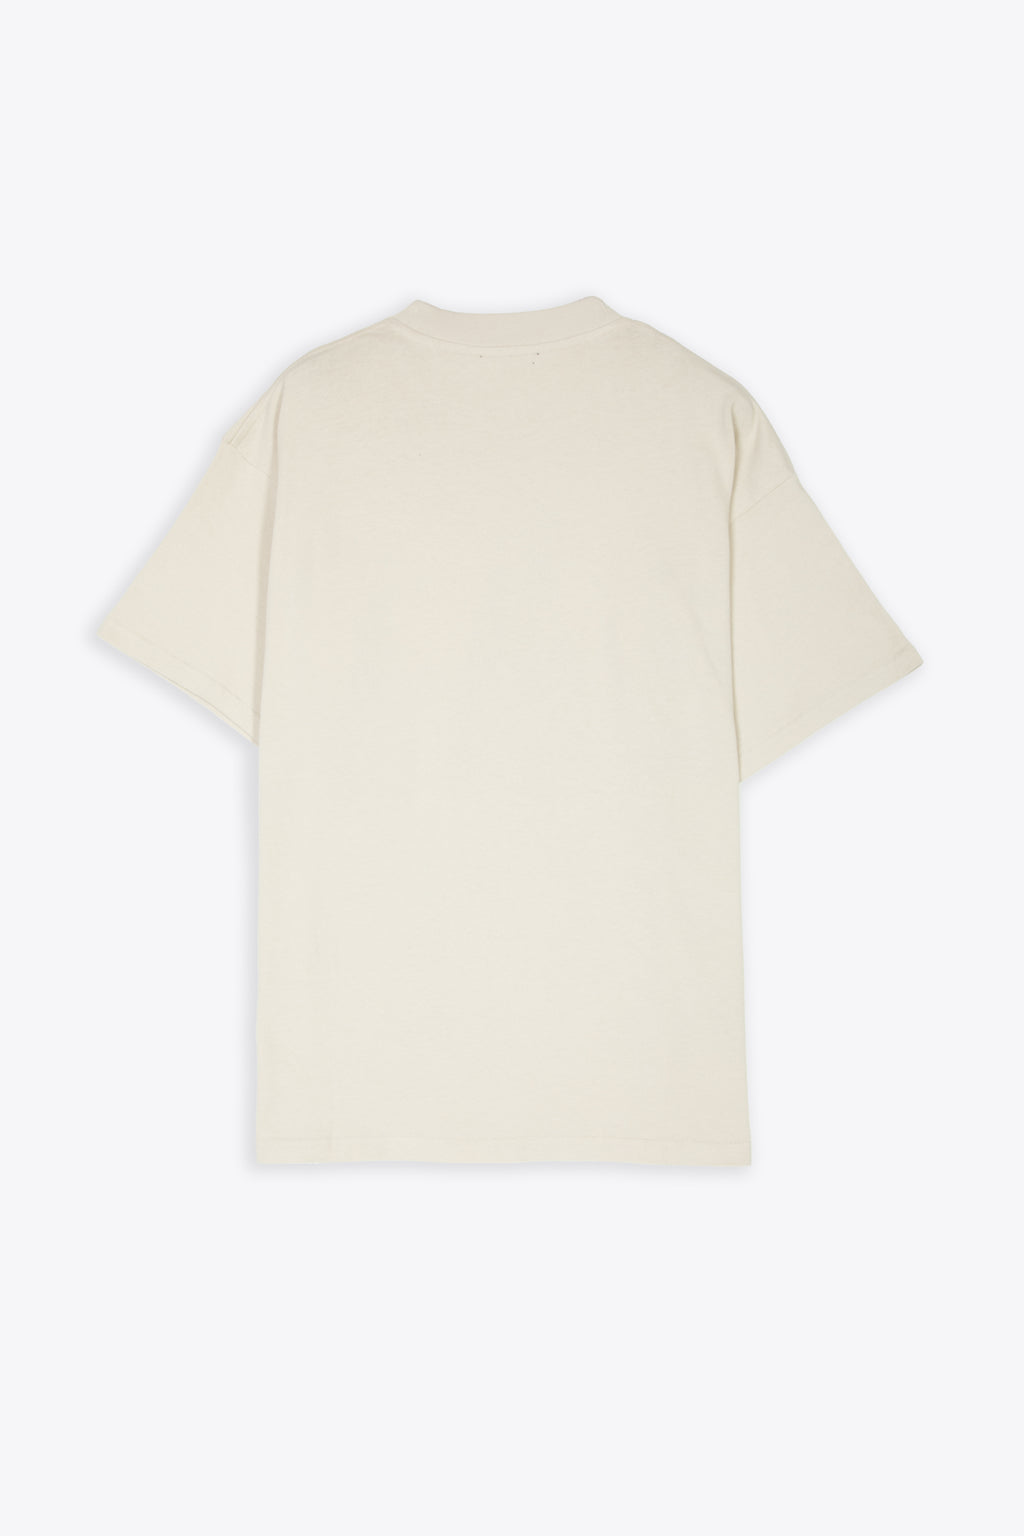 alt-image__Off-white-t-shirt-with-graphic-print---Horoughbred-T-shirt-